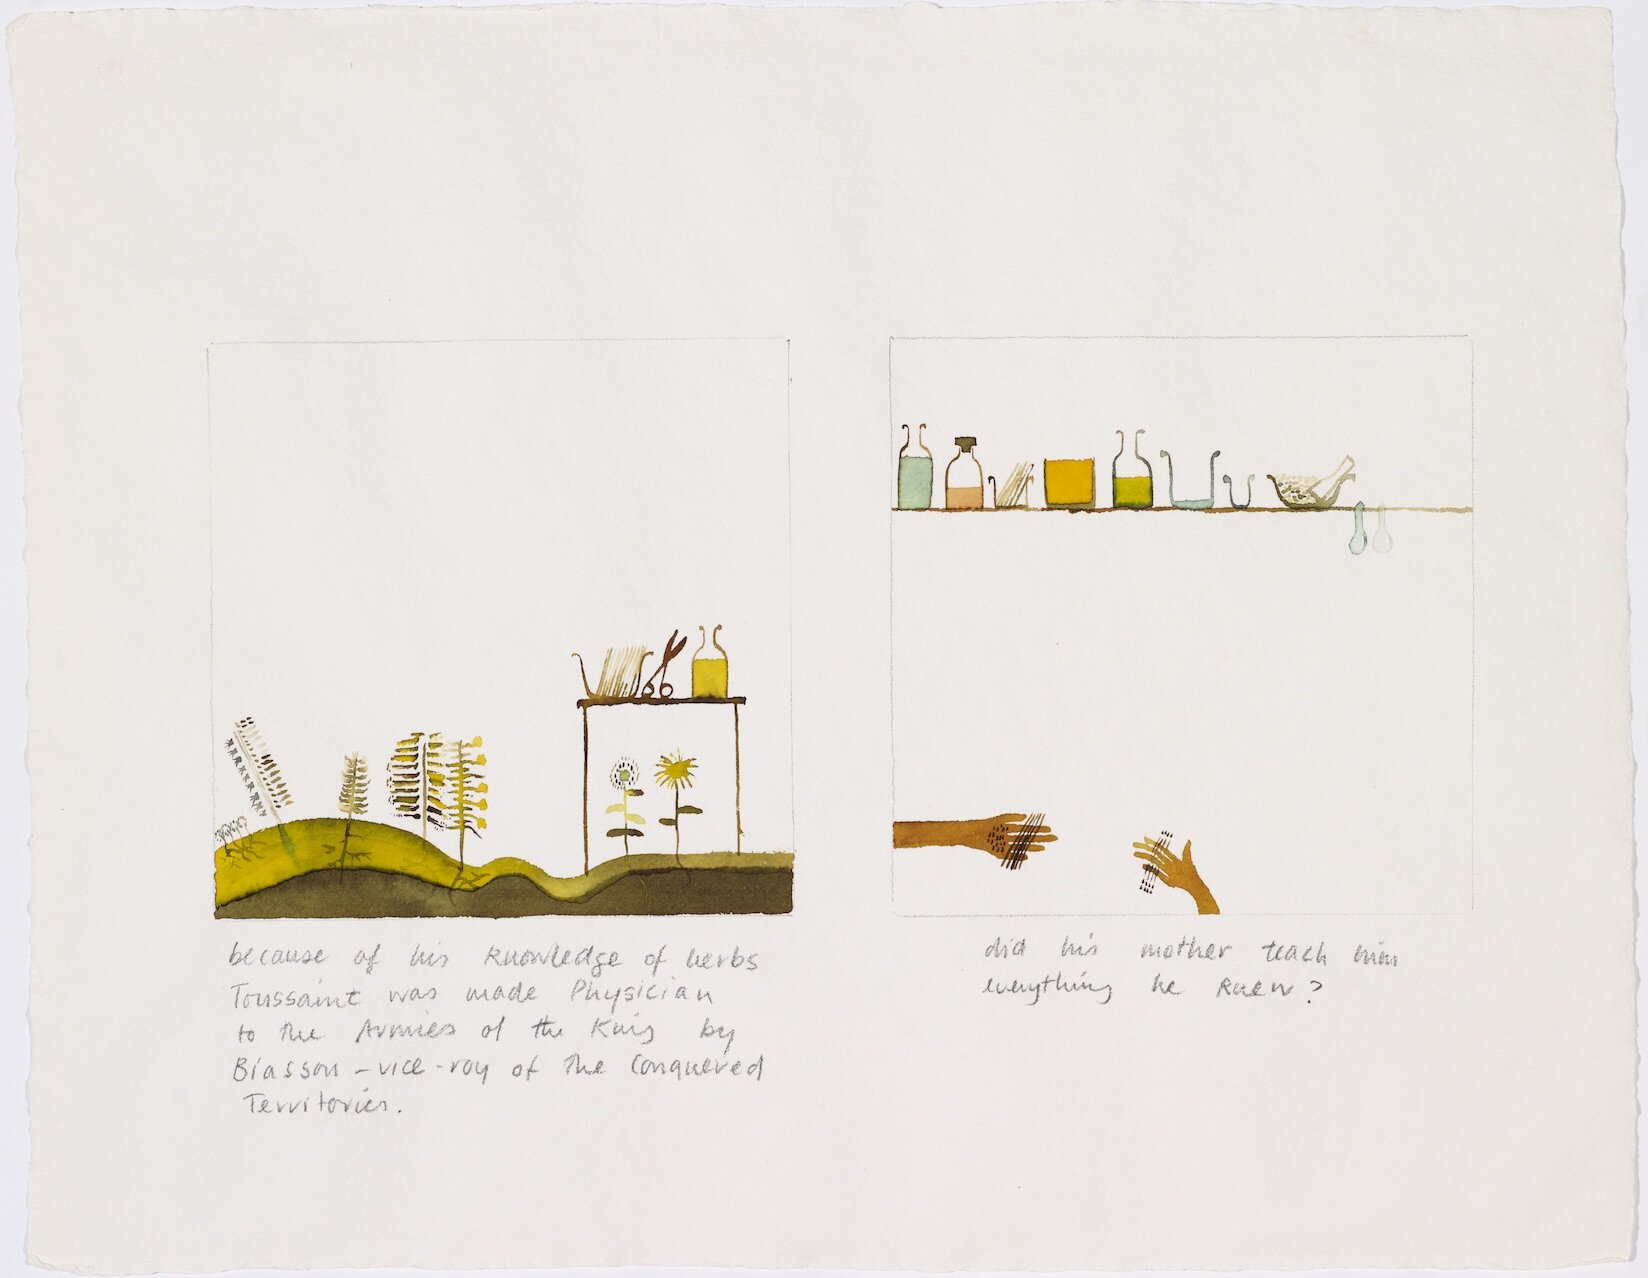 Lubaina Himid, Scenes from the Life of Toussaint L'Ouverture: 9 (1987), watercolour and pencil on paper, 39.5 x 50 cm. Arts Council Collection, Southbank Centre, London © Lubaina Himid.